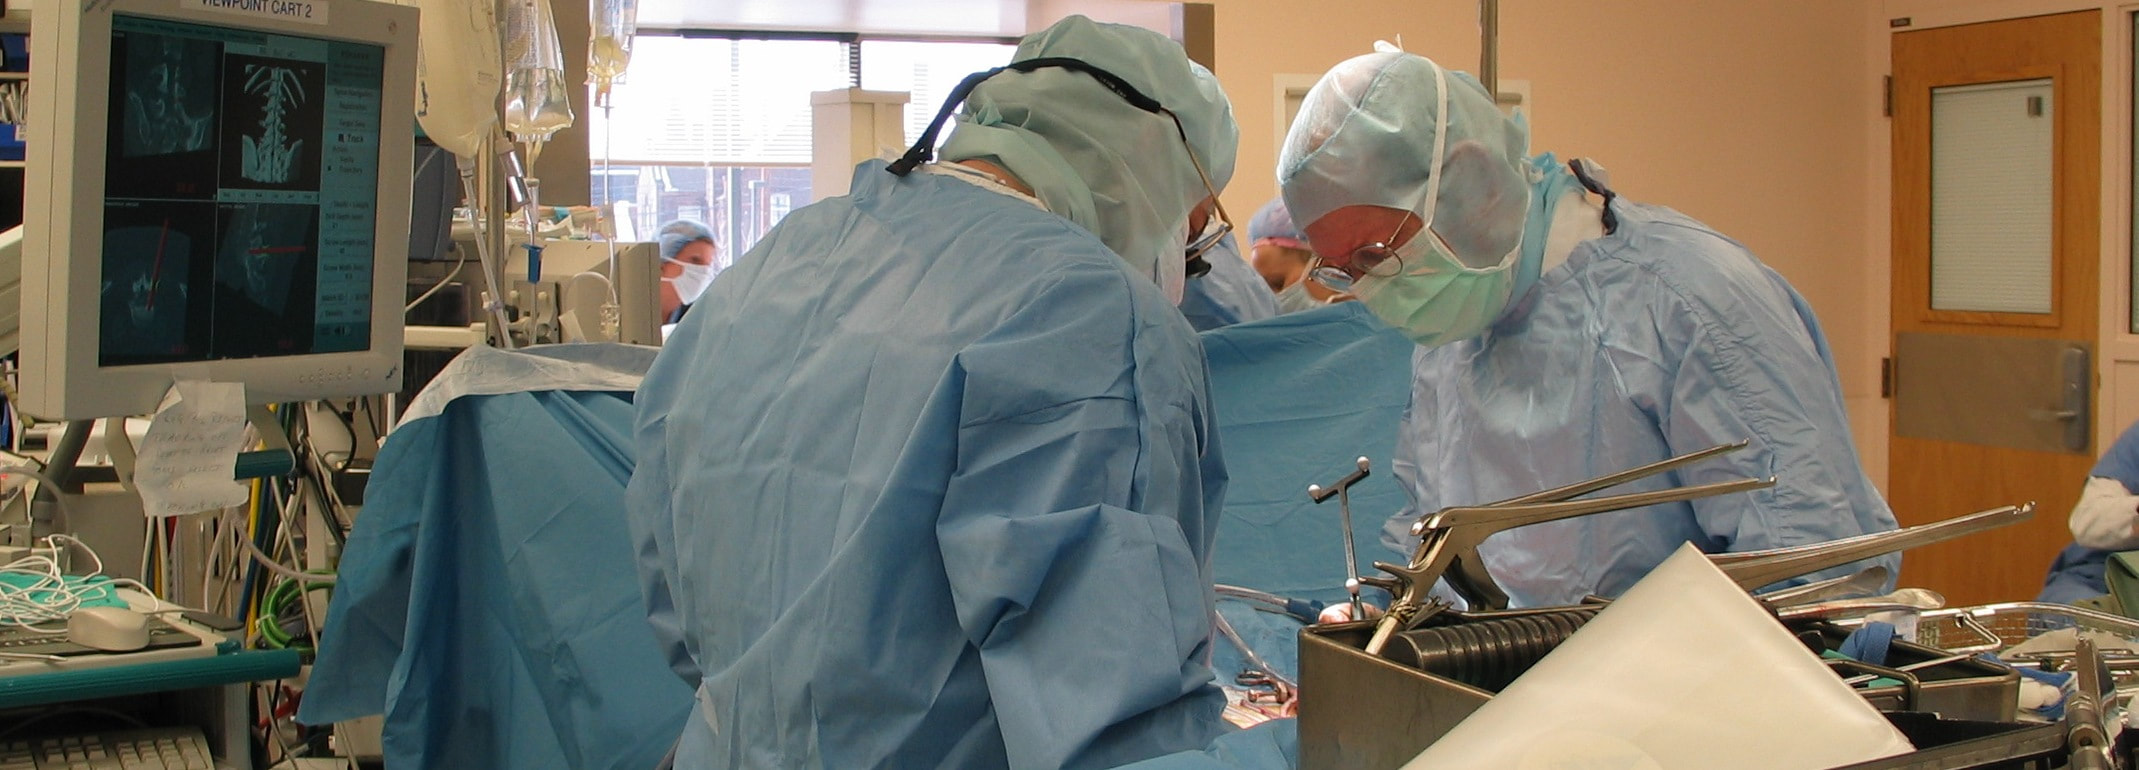 Spine surgeons at work in the operating room.